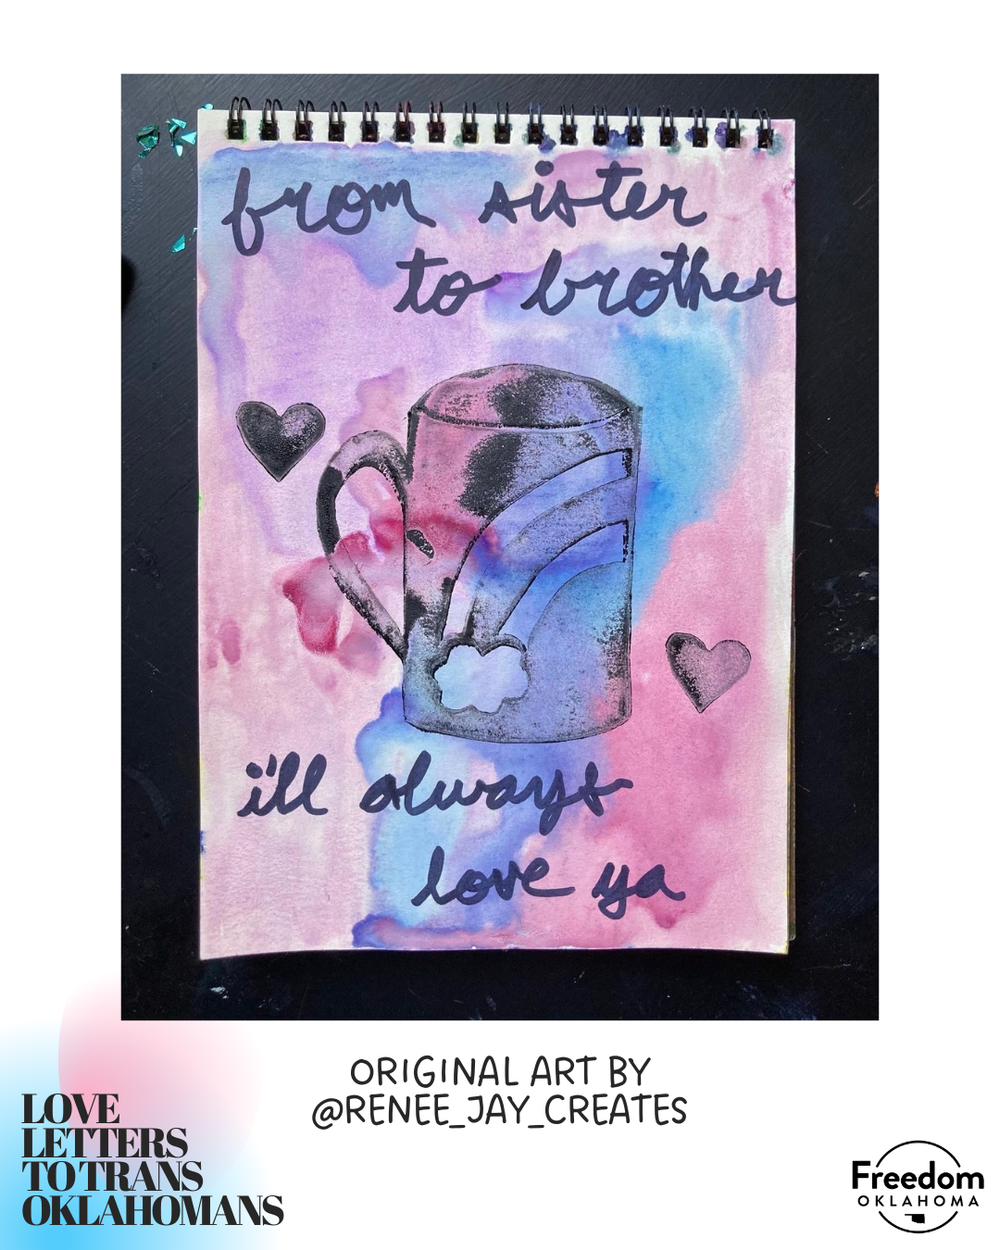  White background with "Love Letters to Trans Oklahomans" in the bottom left. Most of the image is an art submission: Original art by @renee_jay_creates &nbsp;Shades of pink, purple, and blue done in watercolor. An original black block print stamp of